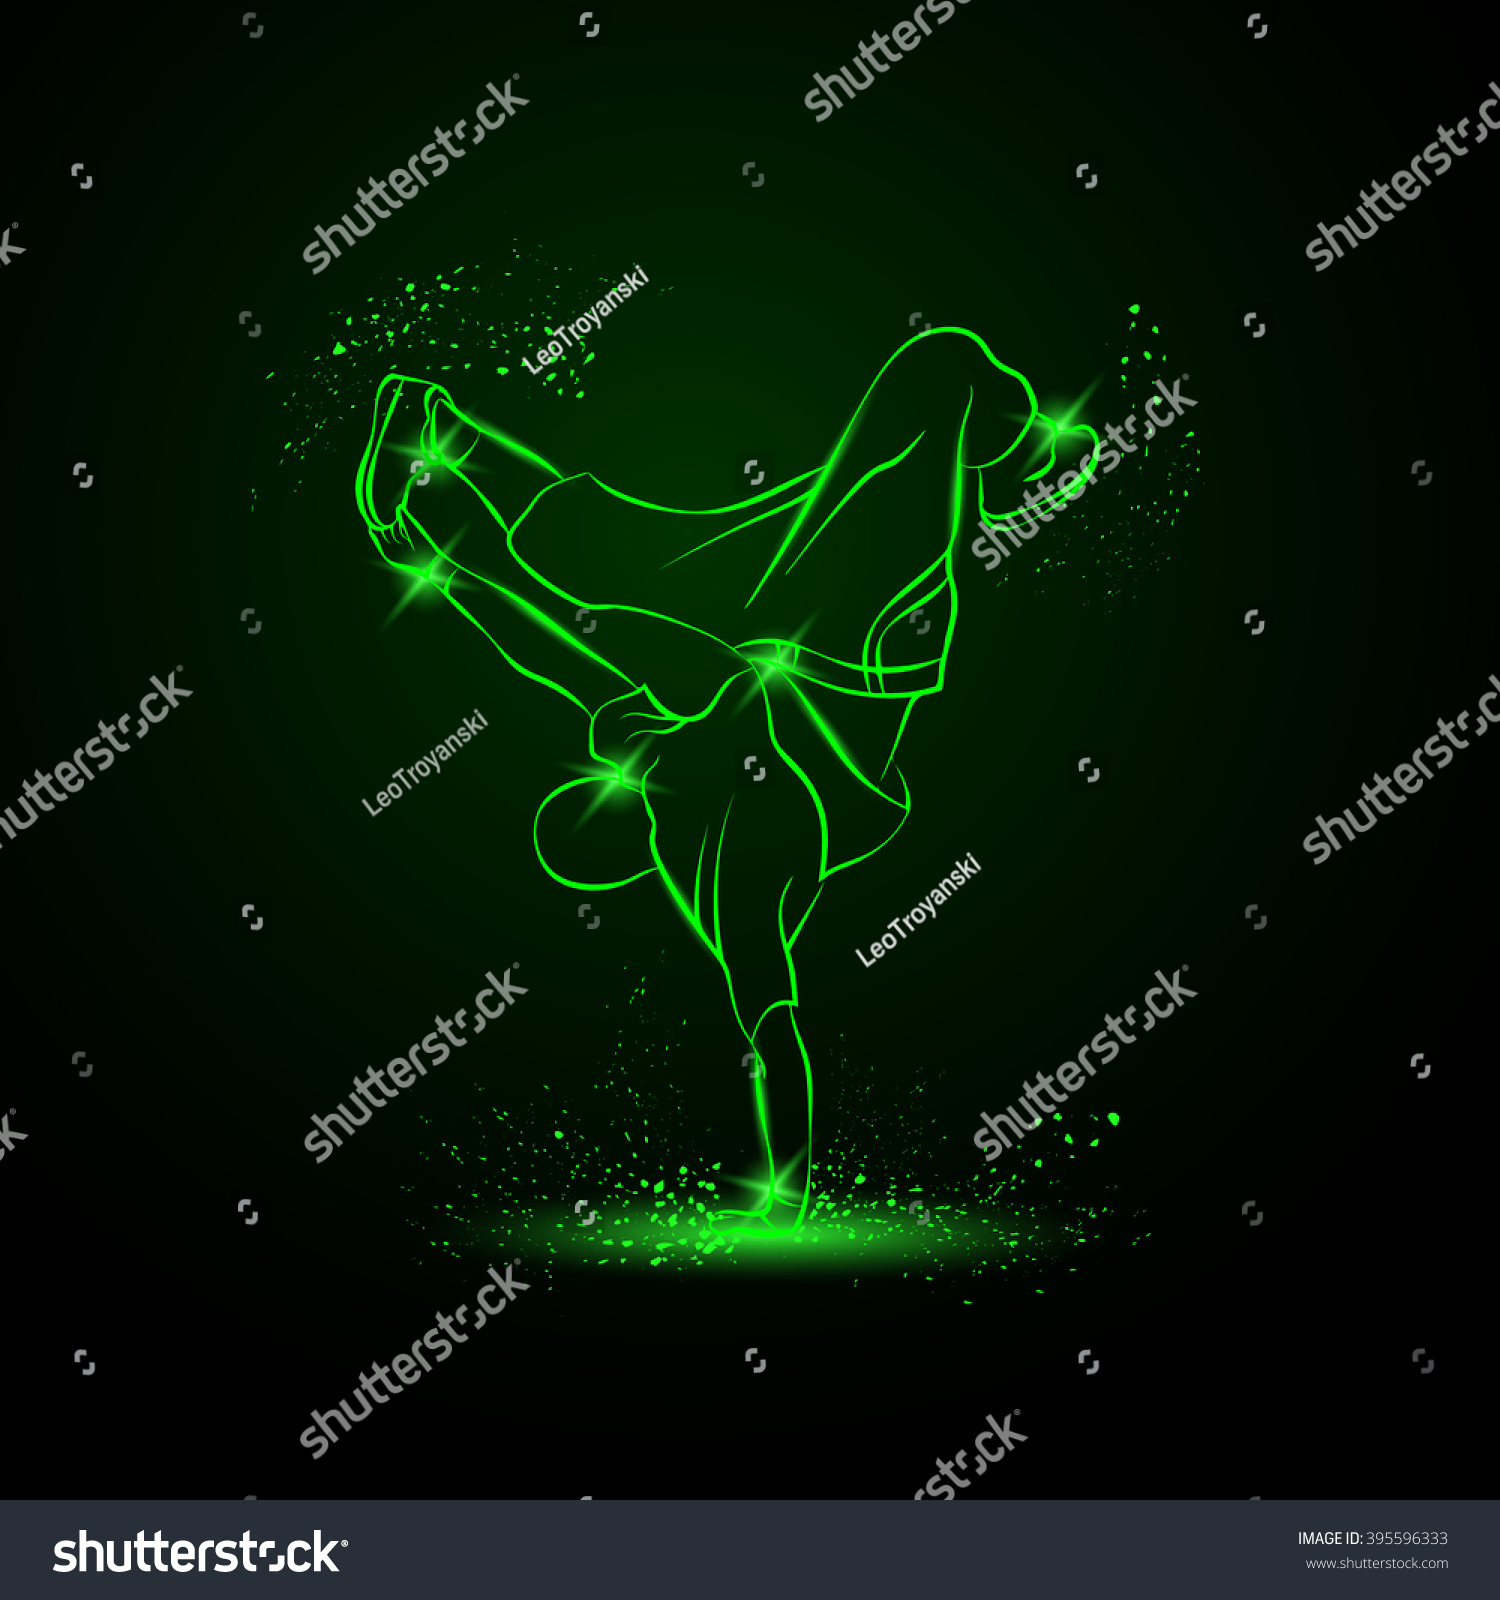 SVG of Breakdancer dancing and making a frieze on one hand. Vector neon illustration. svg